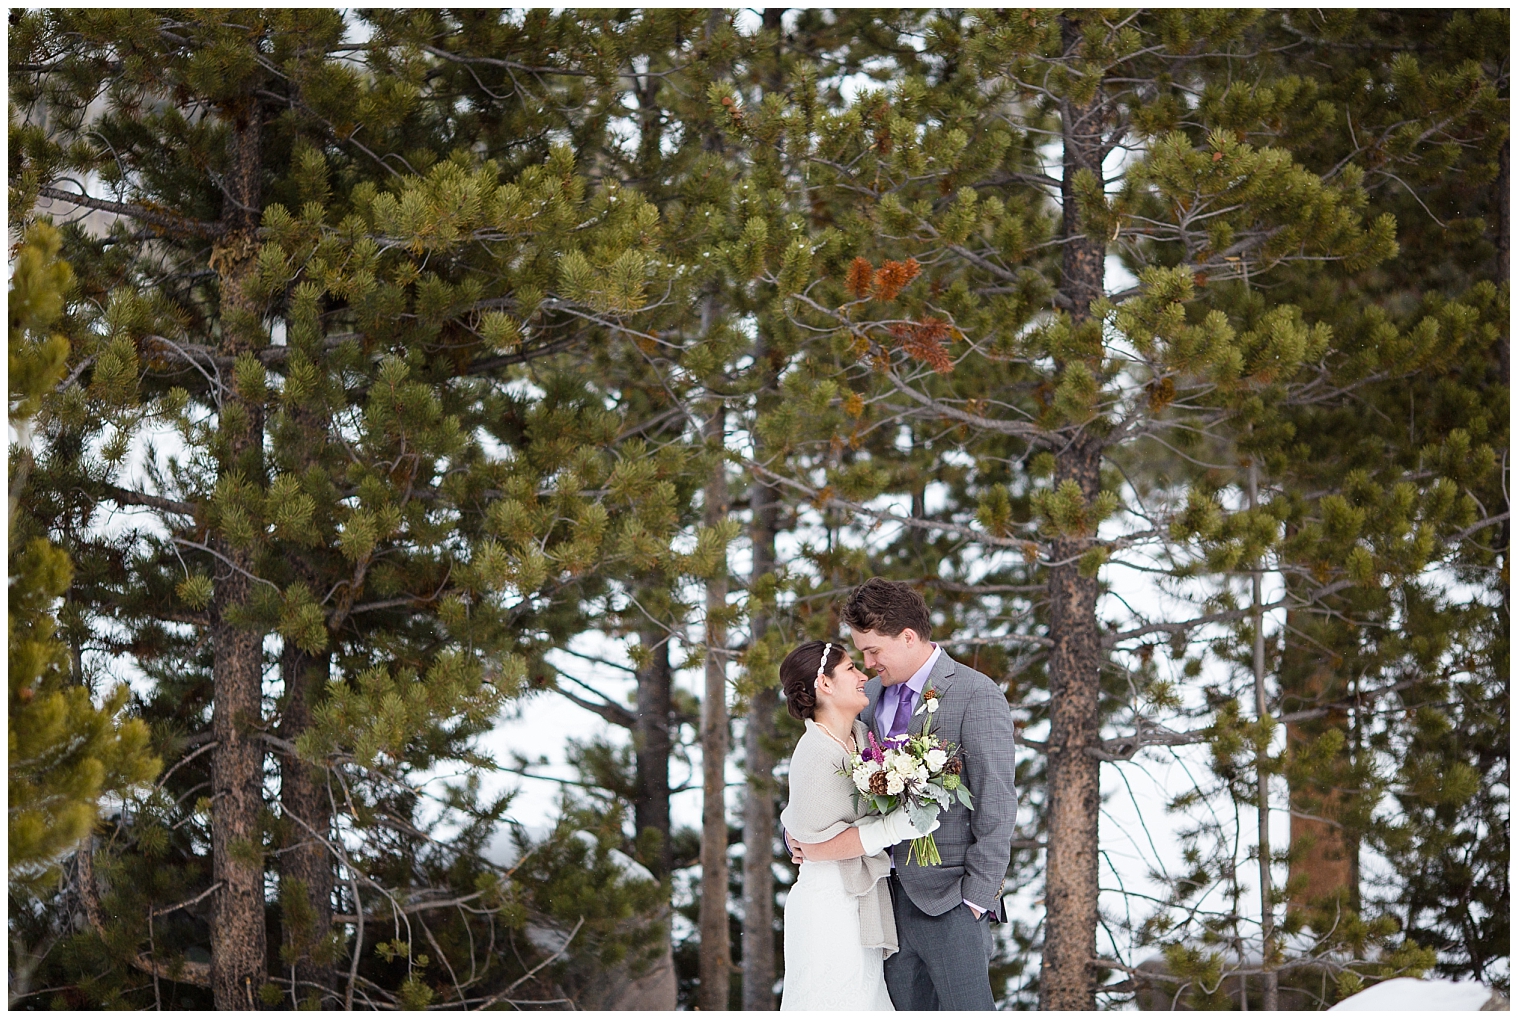 The wedding couple hold one another during portraits at their Breckenridge Colorado mountain elopement.